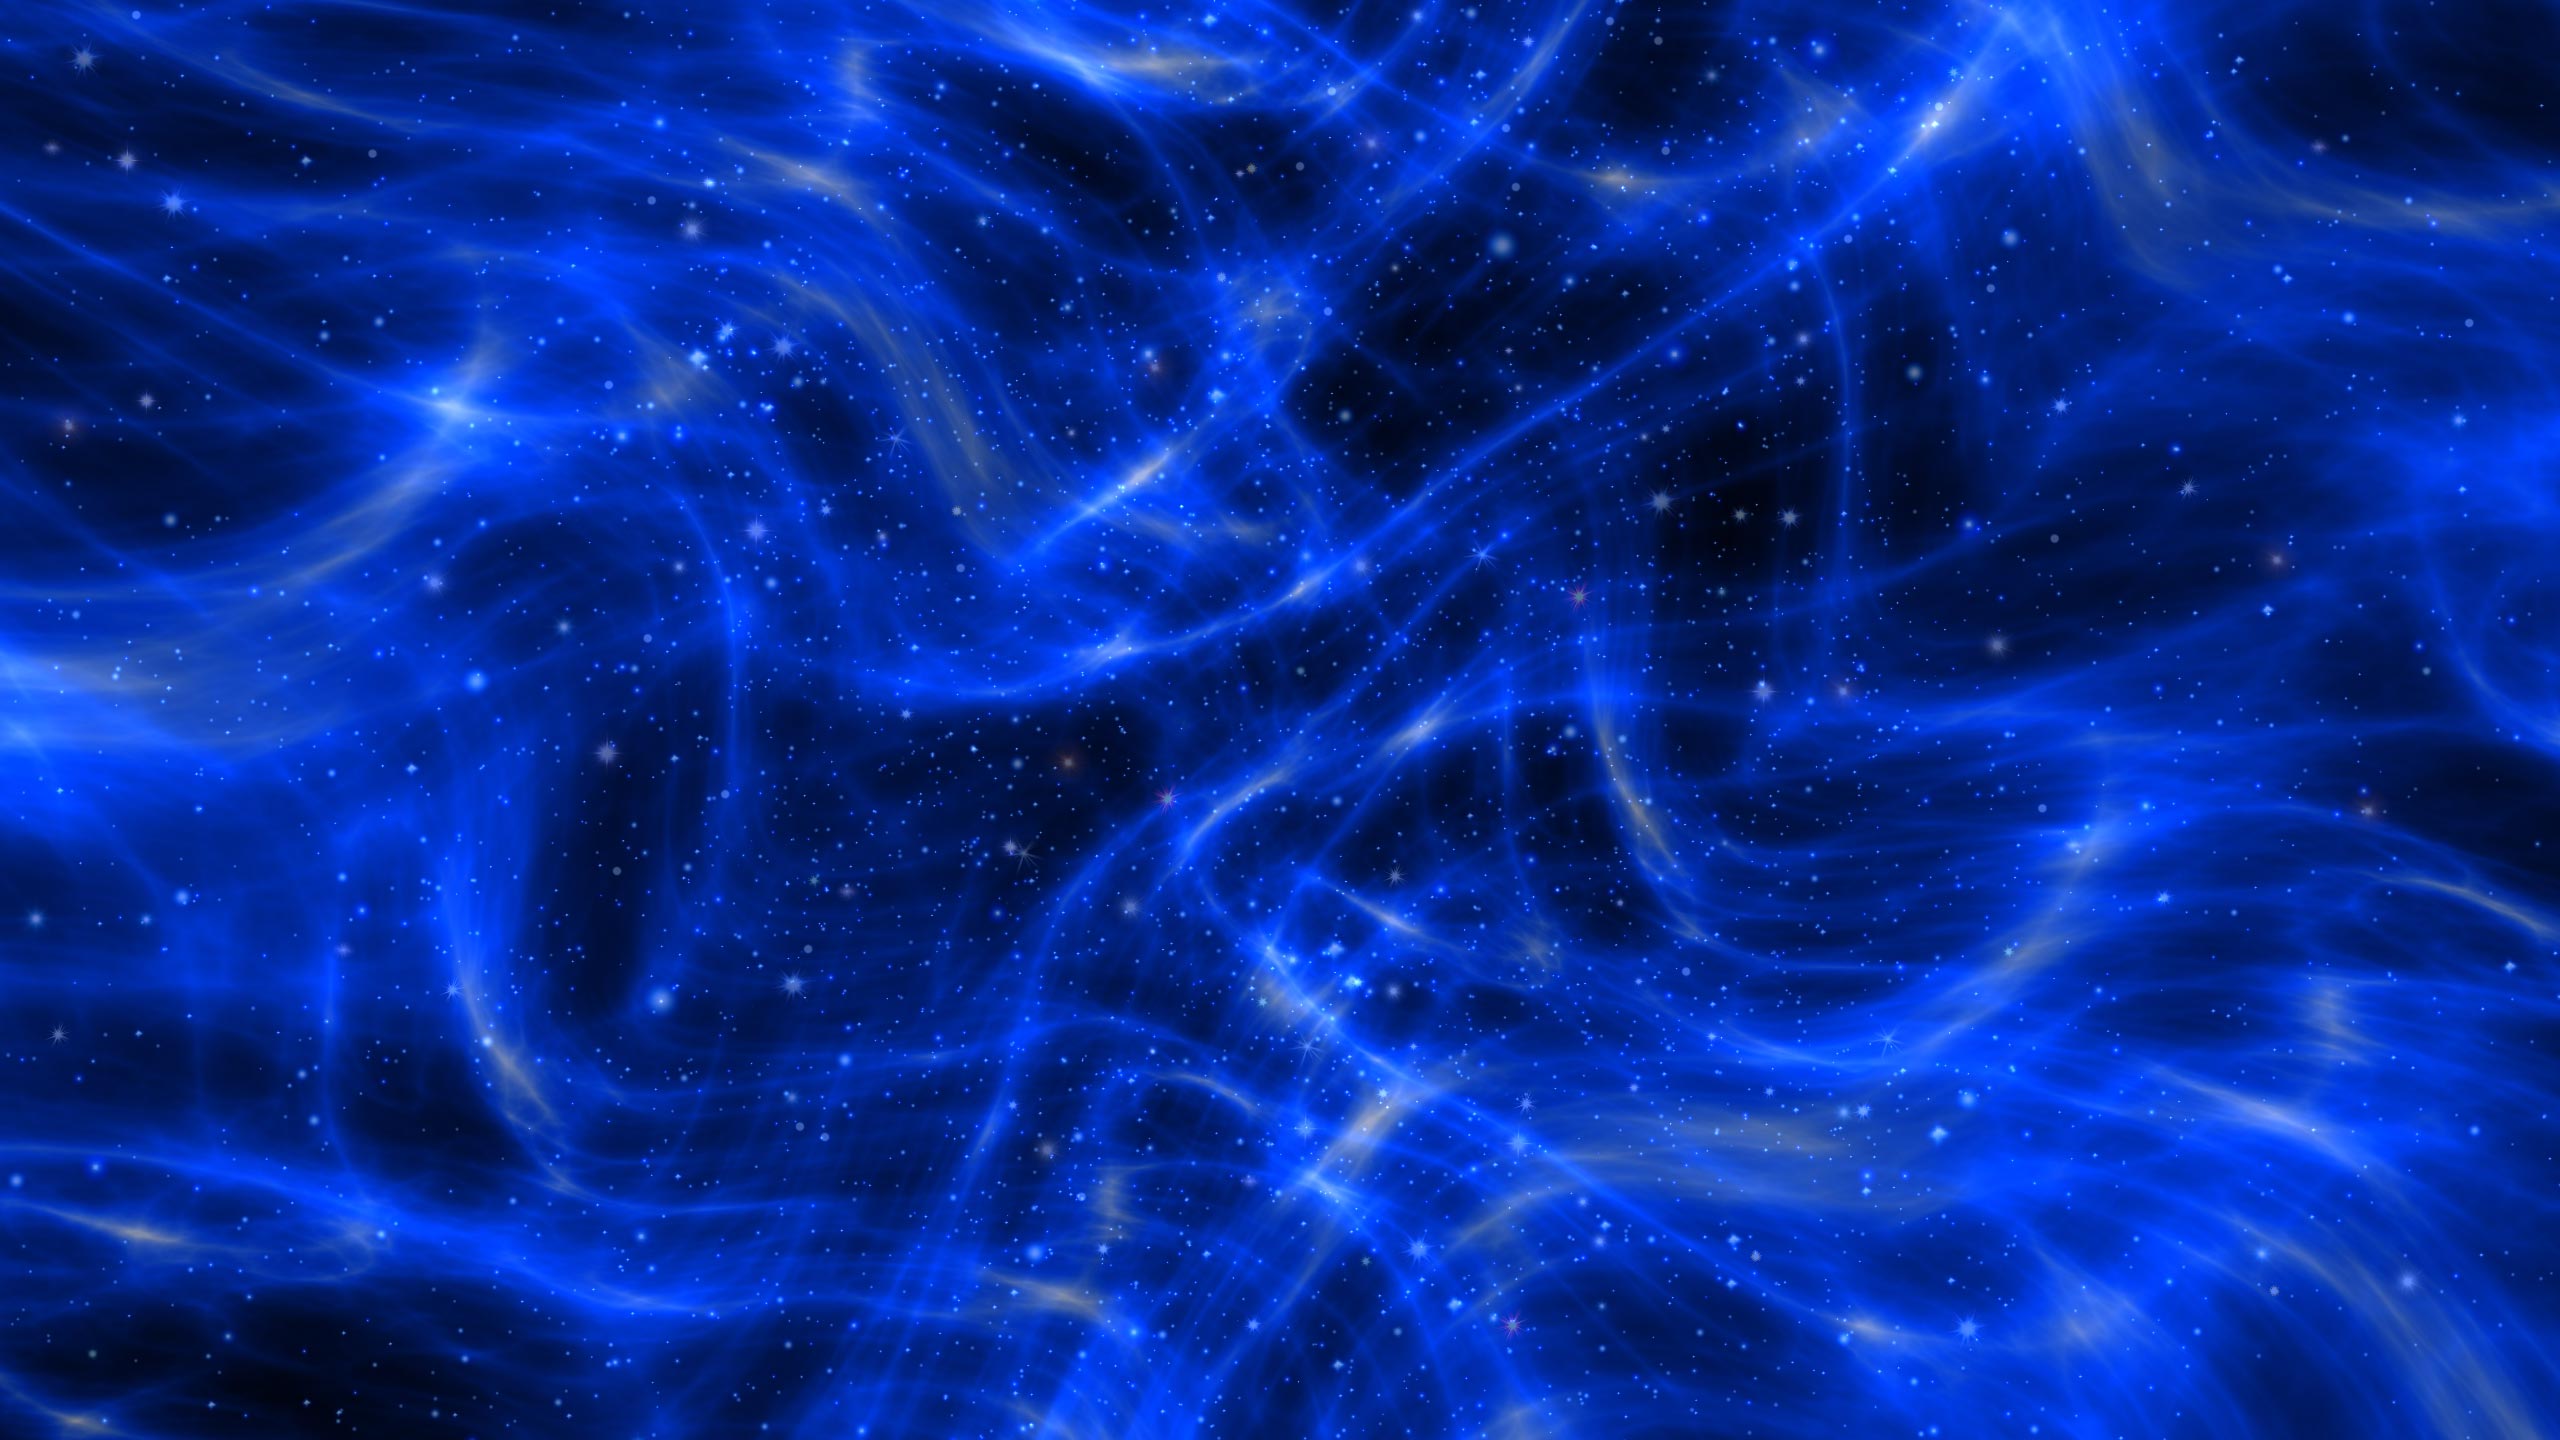 Animated Space Background. Awesome Space Wallpaper, Amazing Space Wallpaper and Space Wallpaper